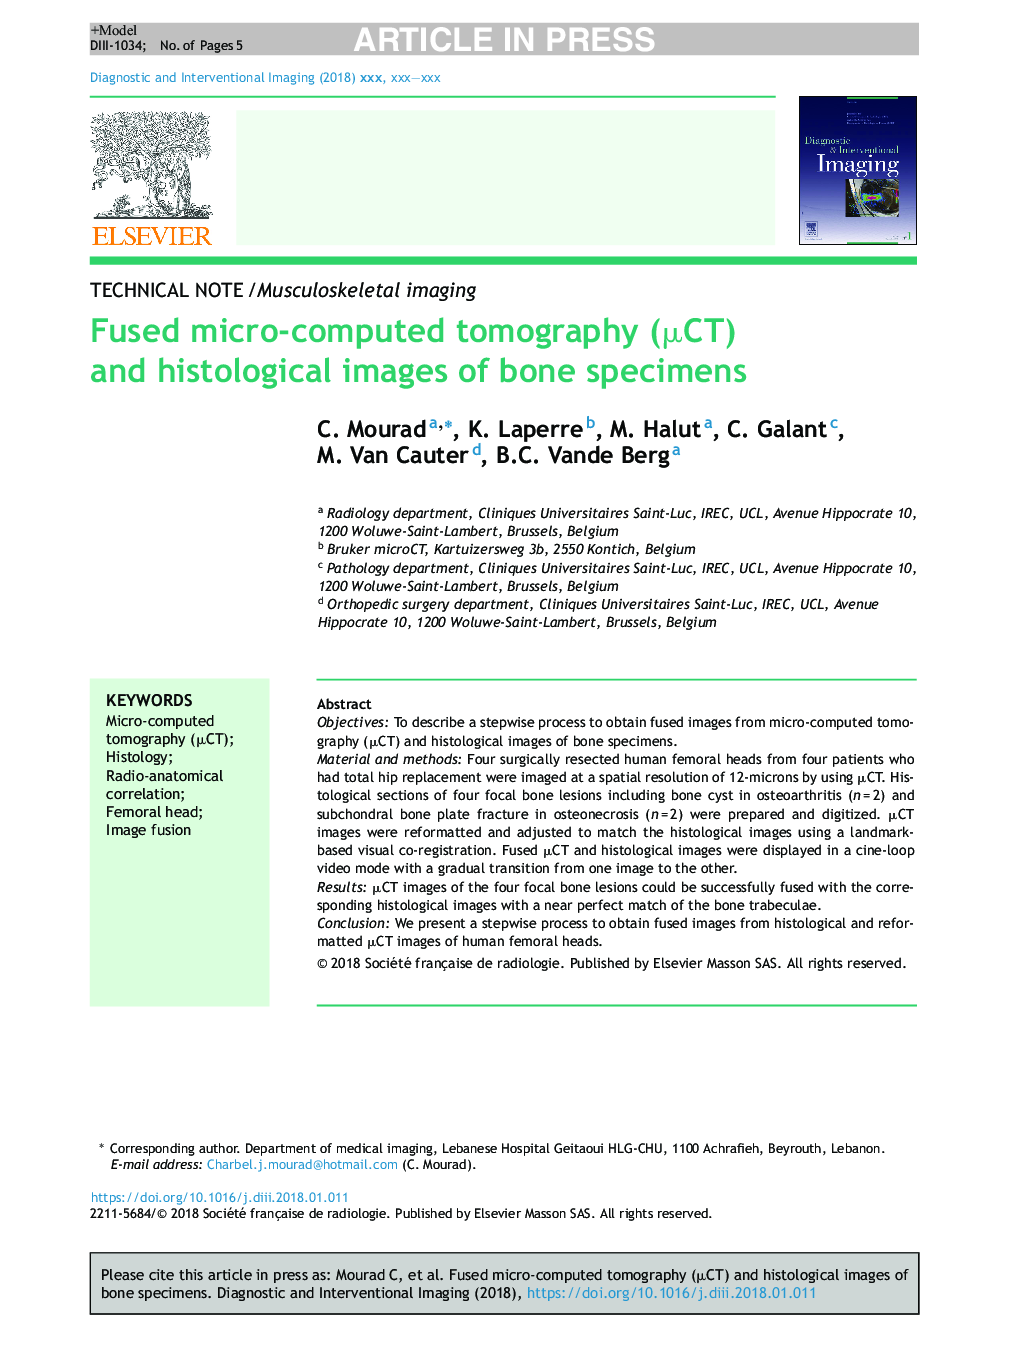 Fused micro-computed tomography (Î¼CT) and histological images of bone specimens